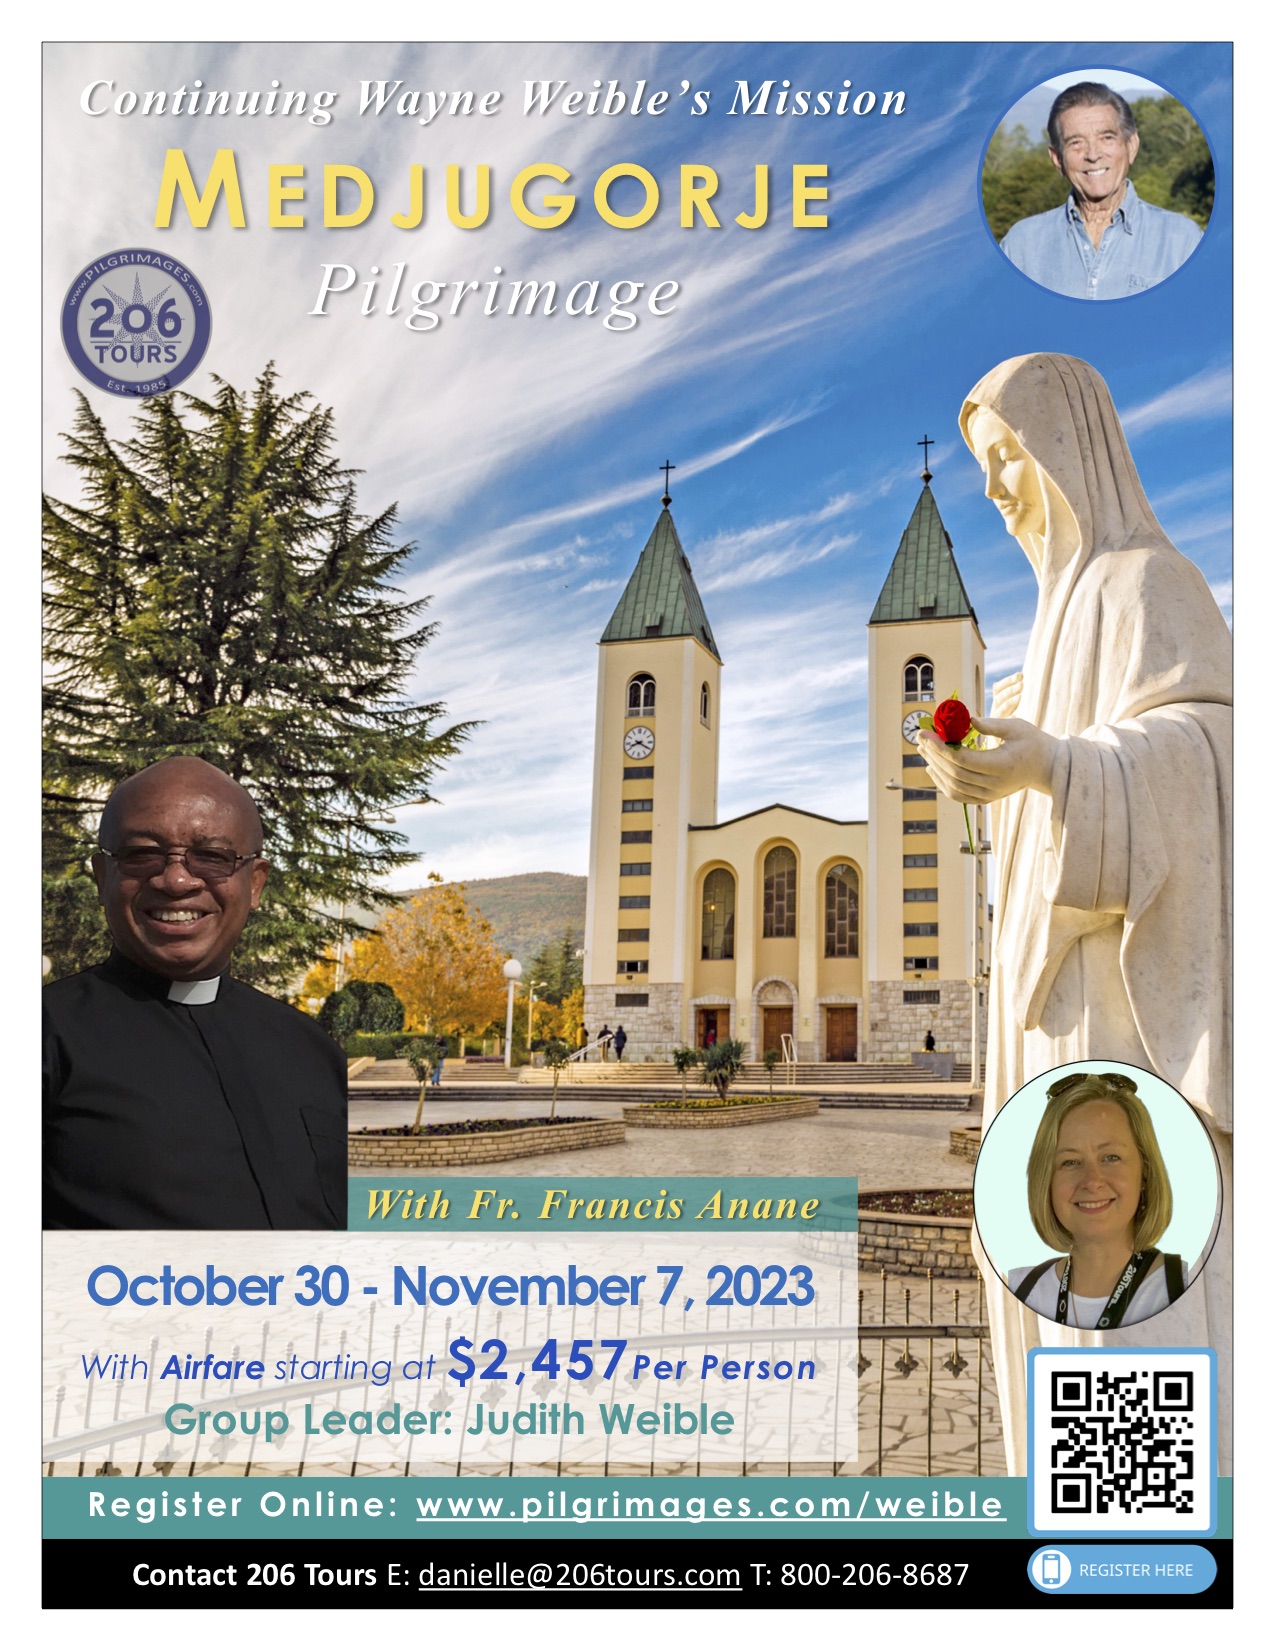 Weible Pilgrimage 2023 updated fr francis anane